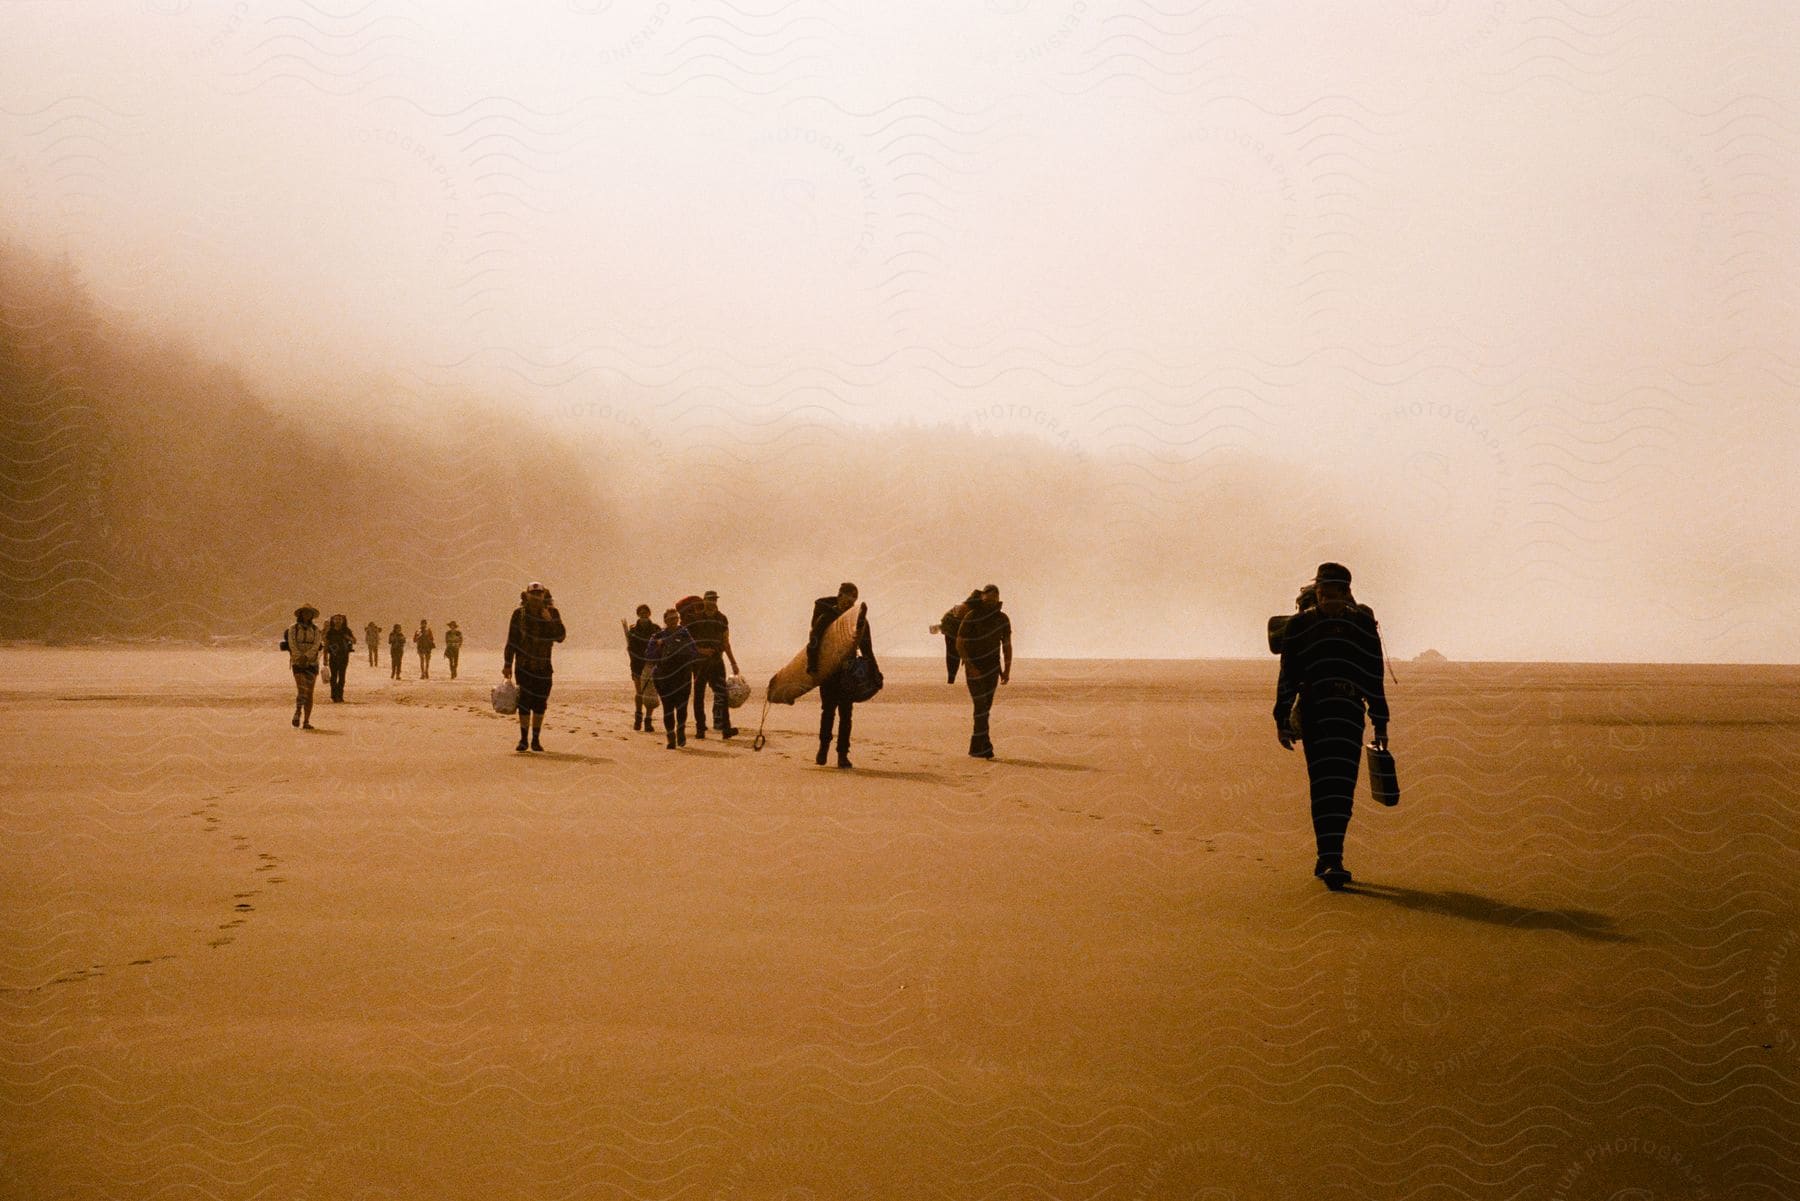 Hikers carrying packs move across sand silhouetted against the sky